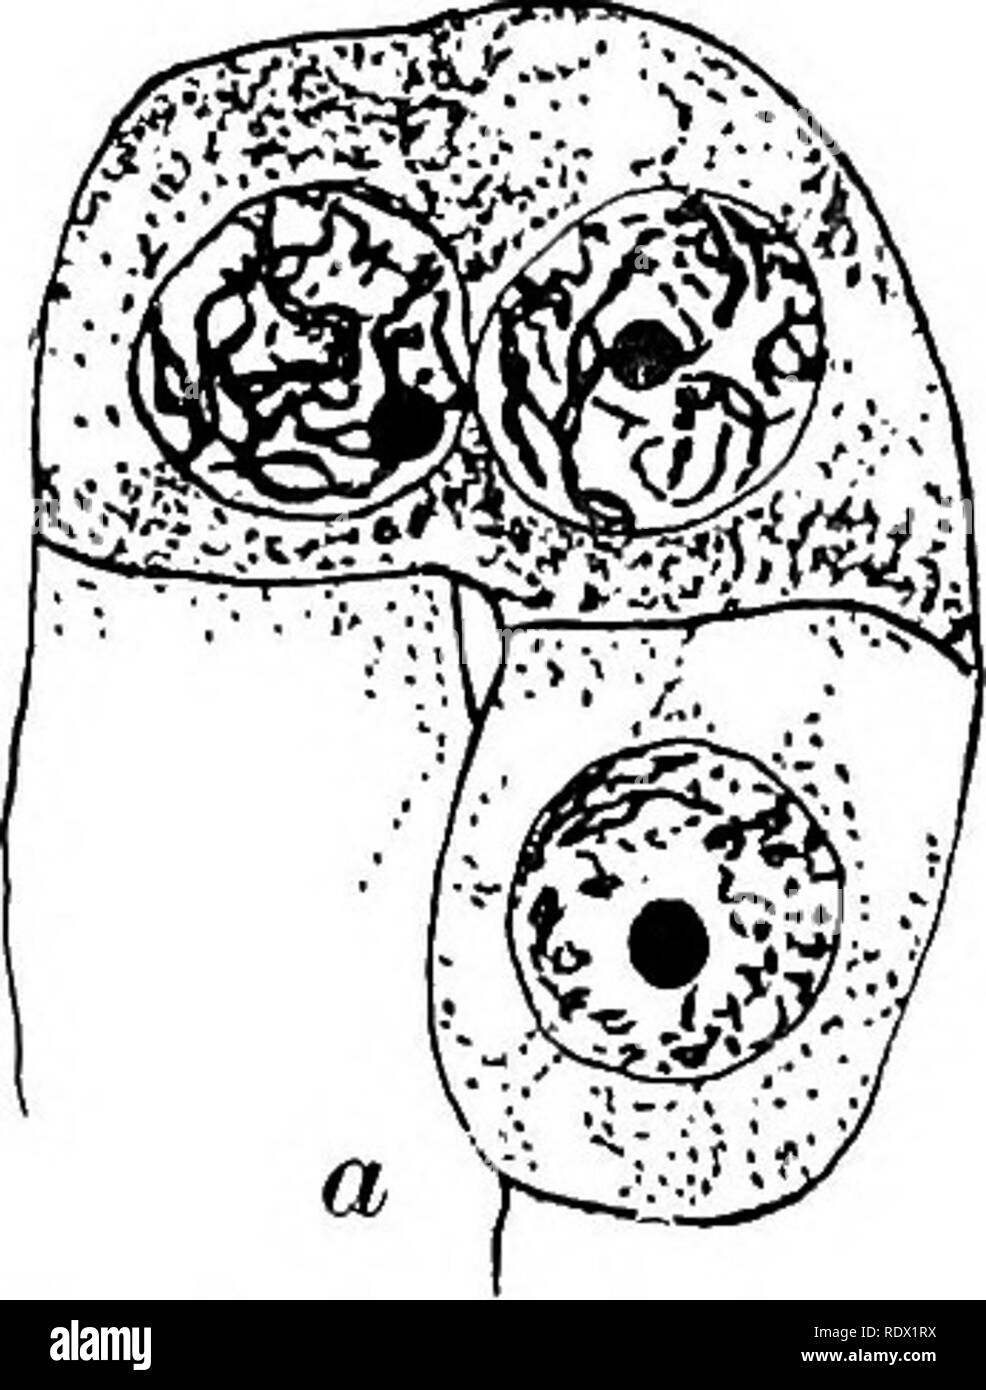 . Fungi, ascomycetes, ustilaginales, uredinales. Fungi. cytoplasm forming the primordium of a;spore. In 1879 Schmitz observed nuclei in the vegetative cells of several Ascomycetes, and in 1893 Gjurasin in Peziza vesiculosa recognized that the divisions in the ascus are karyokinetic. The Fusion in the Ascus. In 1894, Dangeard showed in Peziza vesi- culosa and other forms with a well-developed fructification, that the ascus at its first inception is binucleate and that the two nuclei subsequently unite to form the definitive nucleus of de Bary.. He at first believed that the ascus was produced i Stock Photo